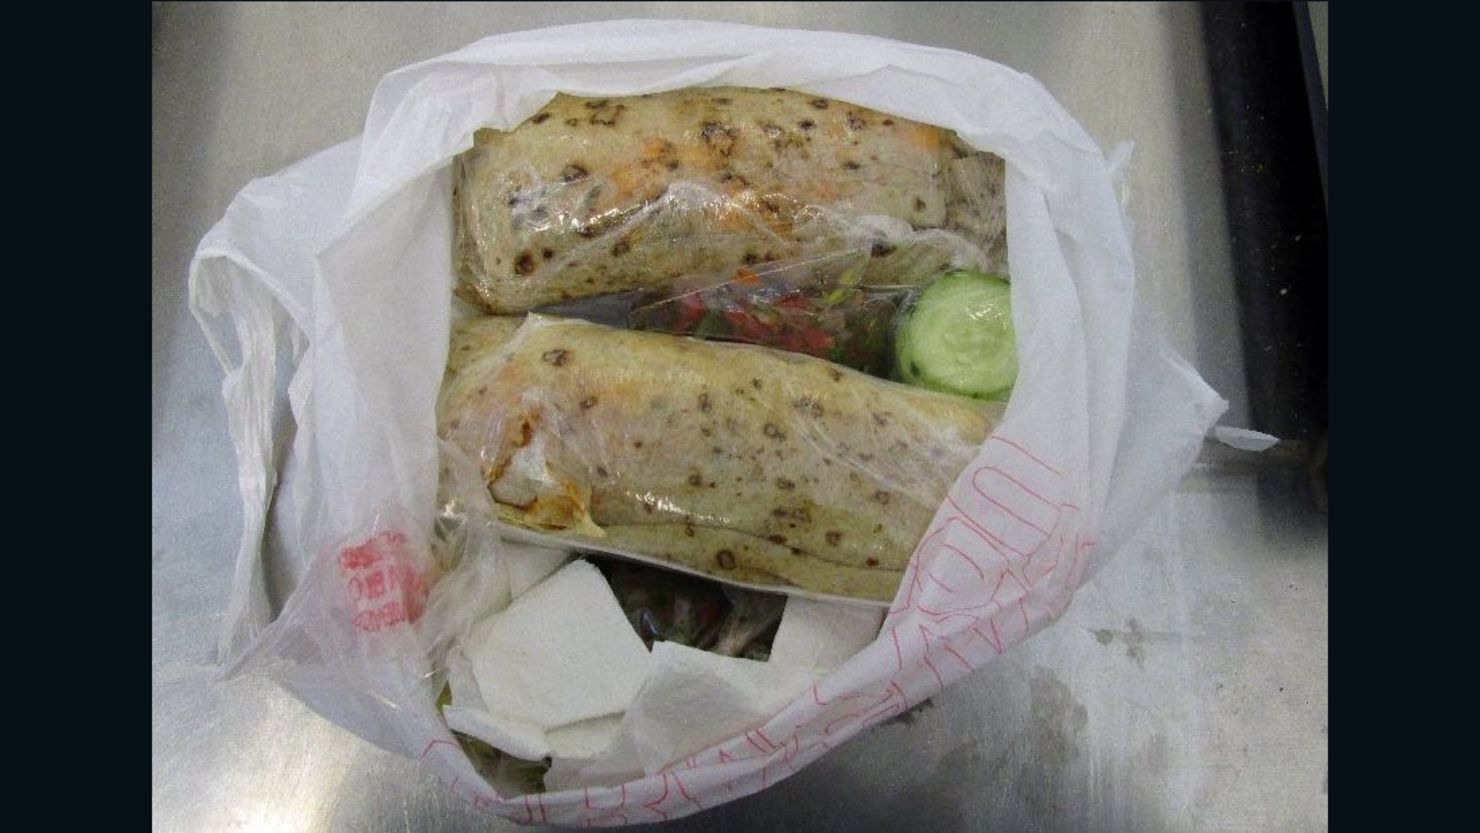 Customs and Border Protection officials say they found methamphetamine disguised as burritos.